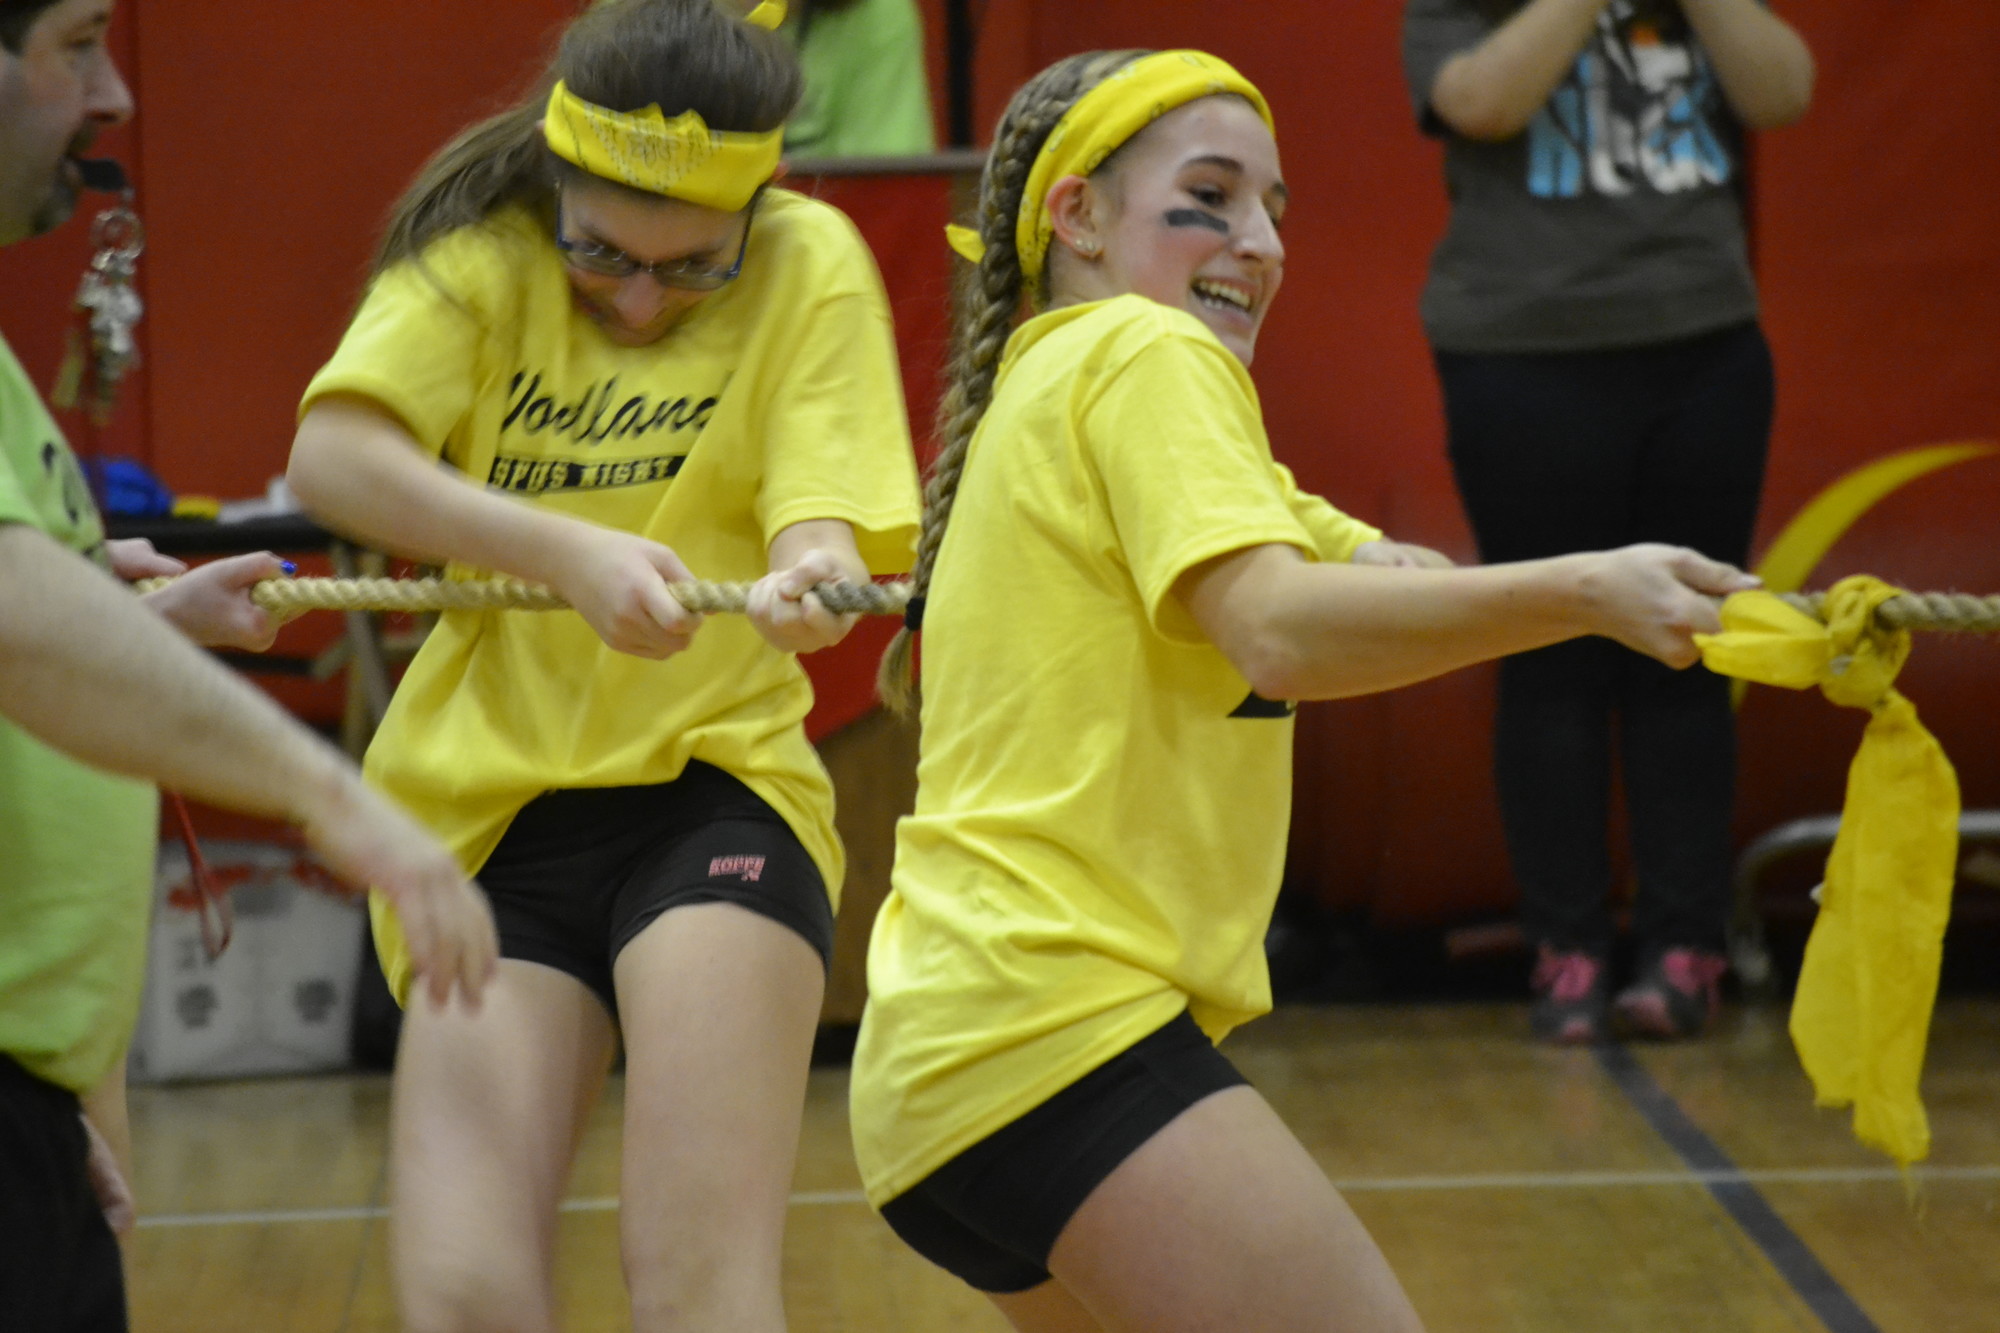 Arianna Duhs put all of her strength into the tug of war, while her friends helped her out.